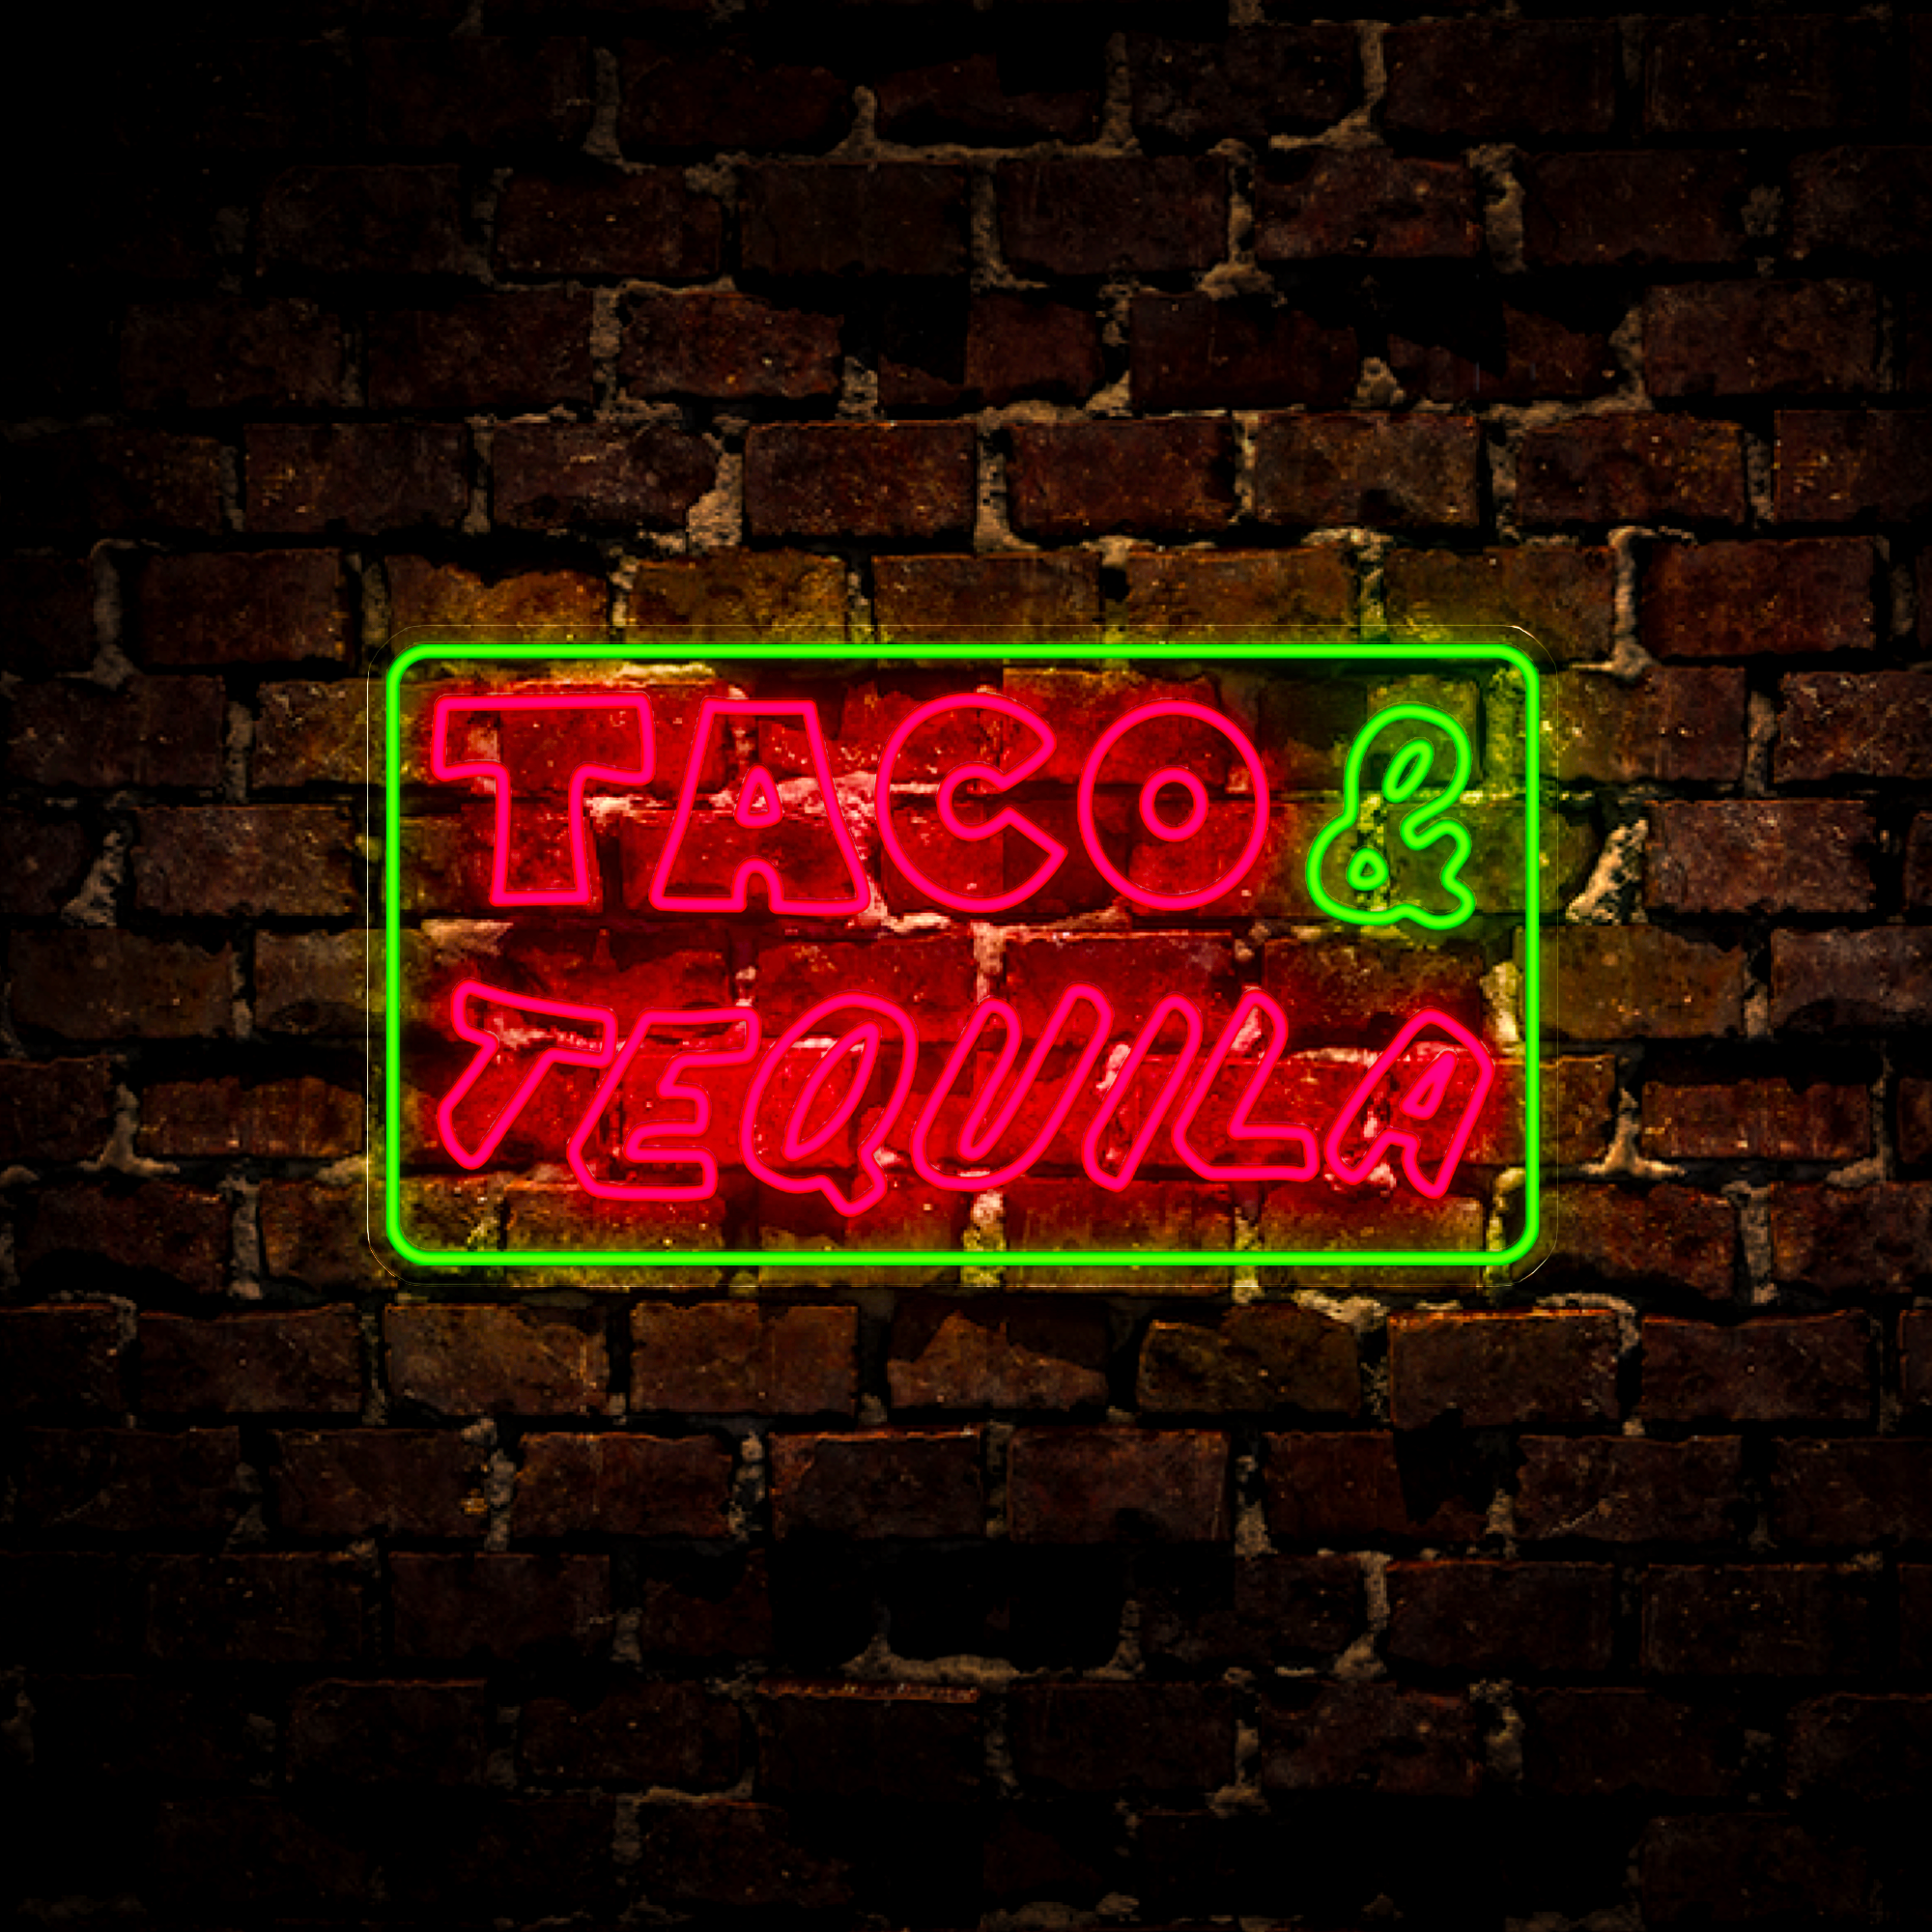 Taco & Tequila Neon Sign